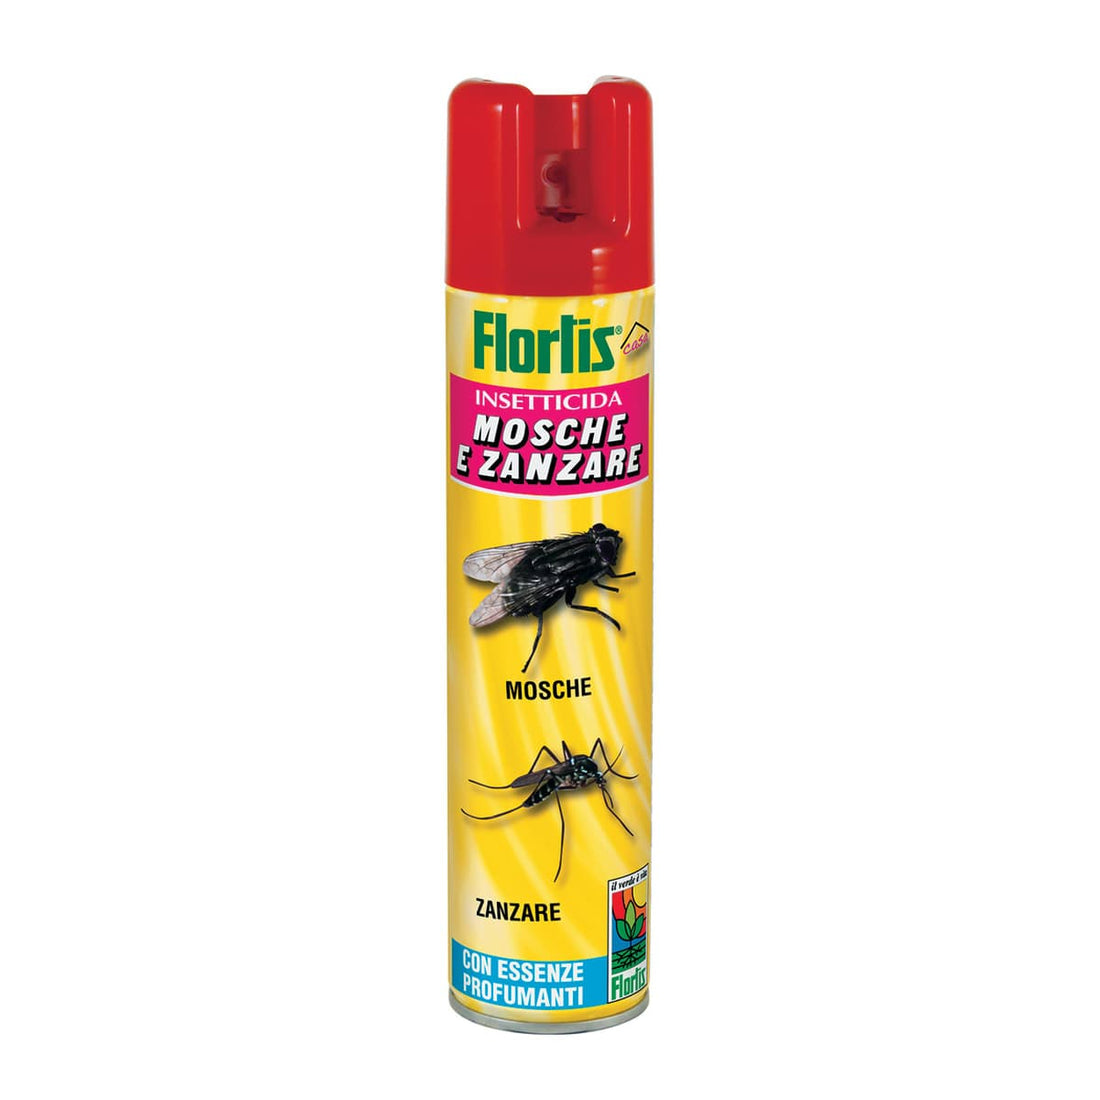 ANTI-FLY AND MOSQUITO SPRAY 300 ML - best price from Maltashopper.com BR510120047